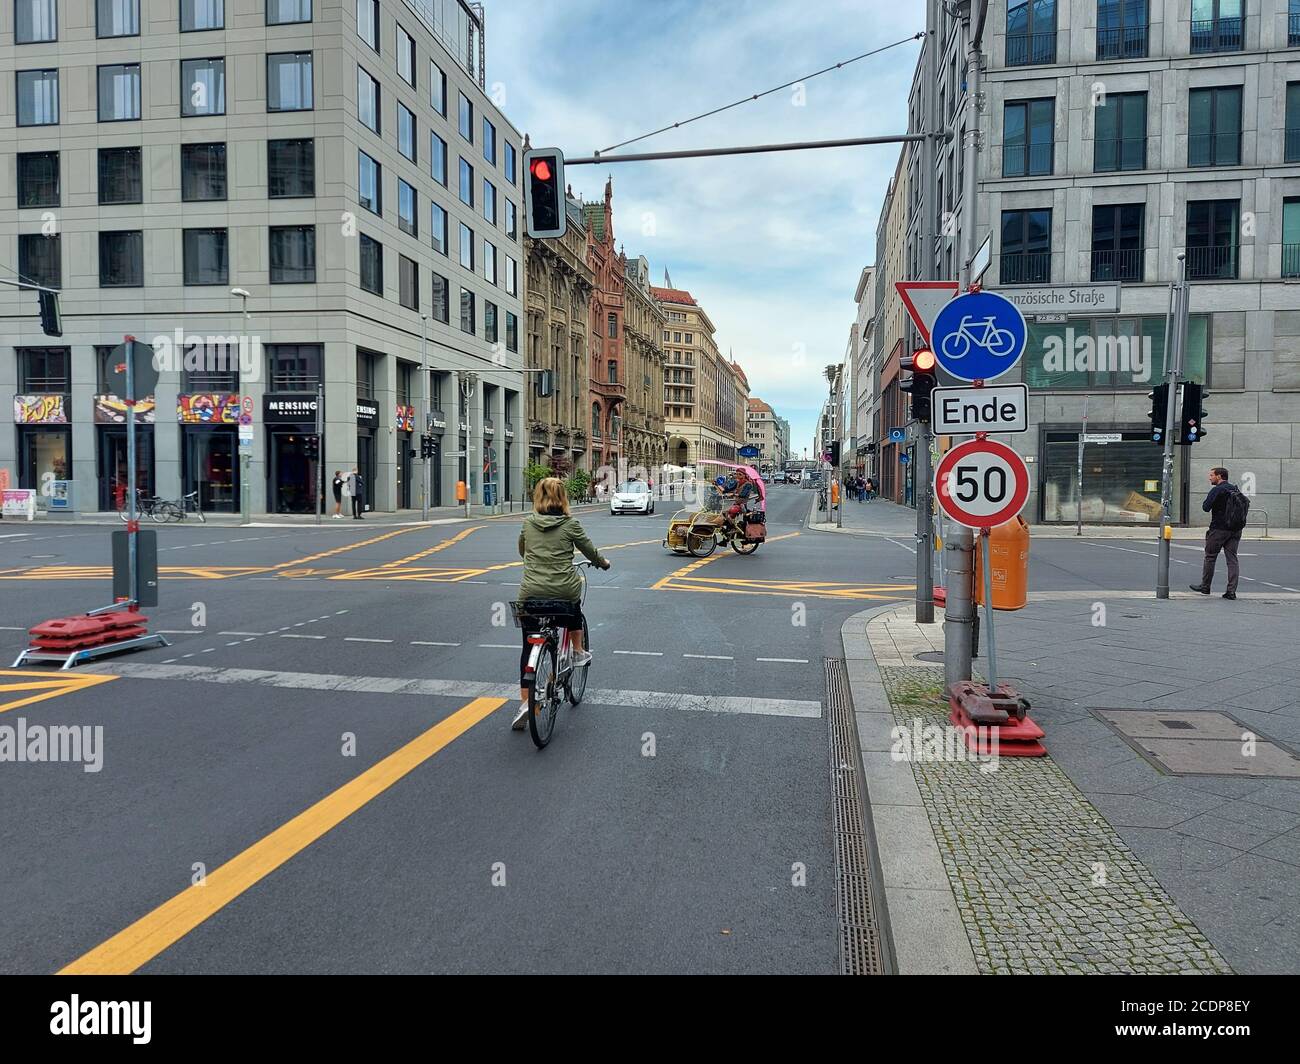 FriedrichstraSe (Friedrichstrasse) street in Berlin, Germany, on August 29, 2020. Until the end of January 2021, about half-kilometer section of one of the most famous streets in Berlin will be reserved exclusively for pedestrians and cyclists. The city wants to verify the extent to which this measure will increase the quality of life in public space. (CTK Photo/Ales Zapotocky) Stock Photo